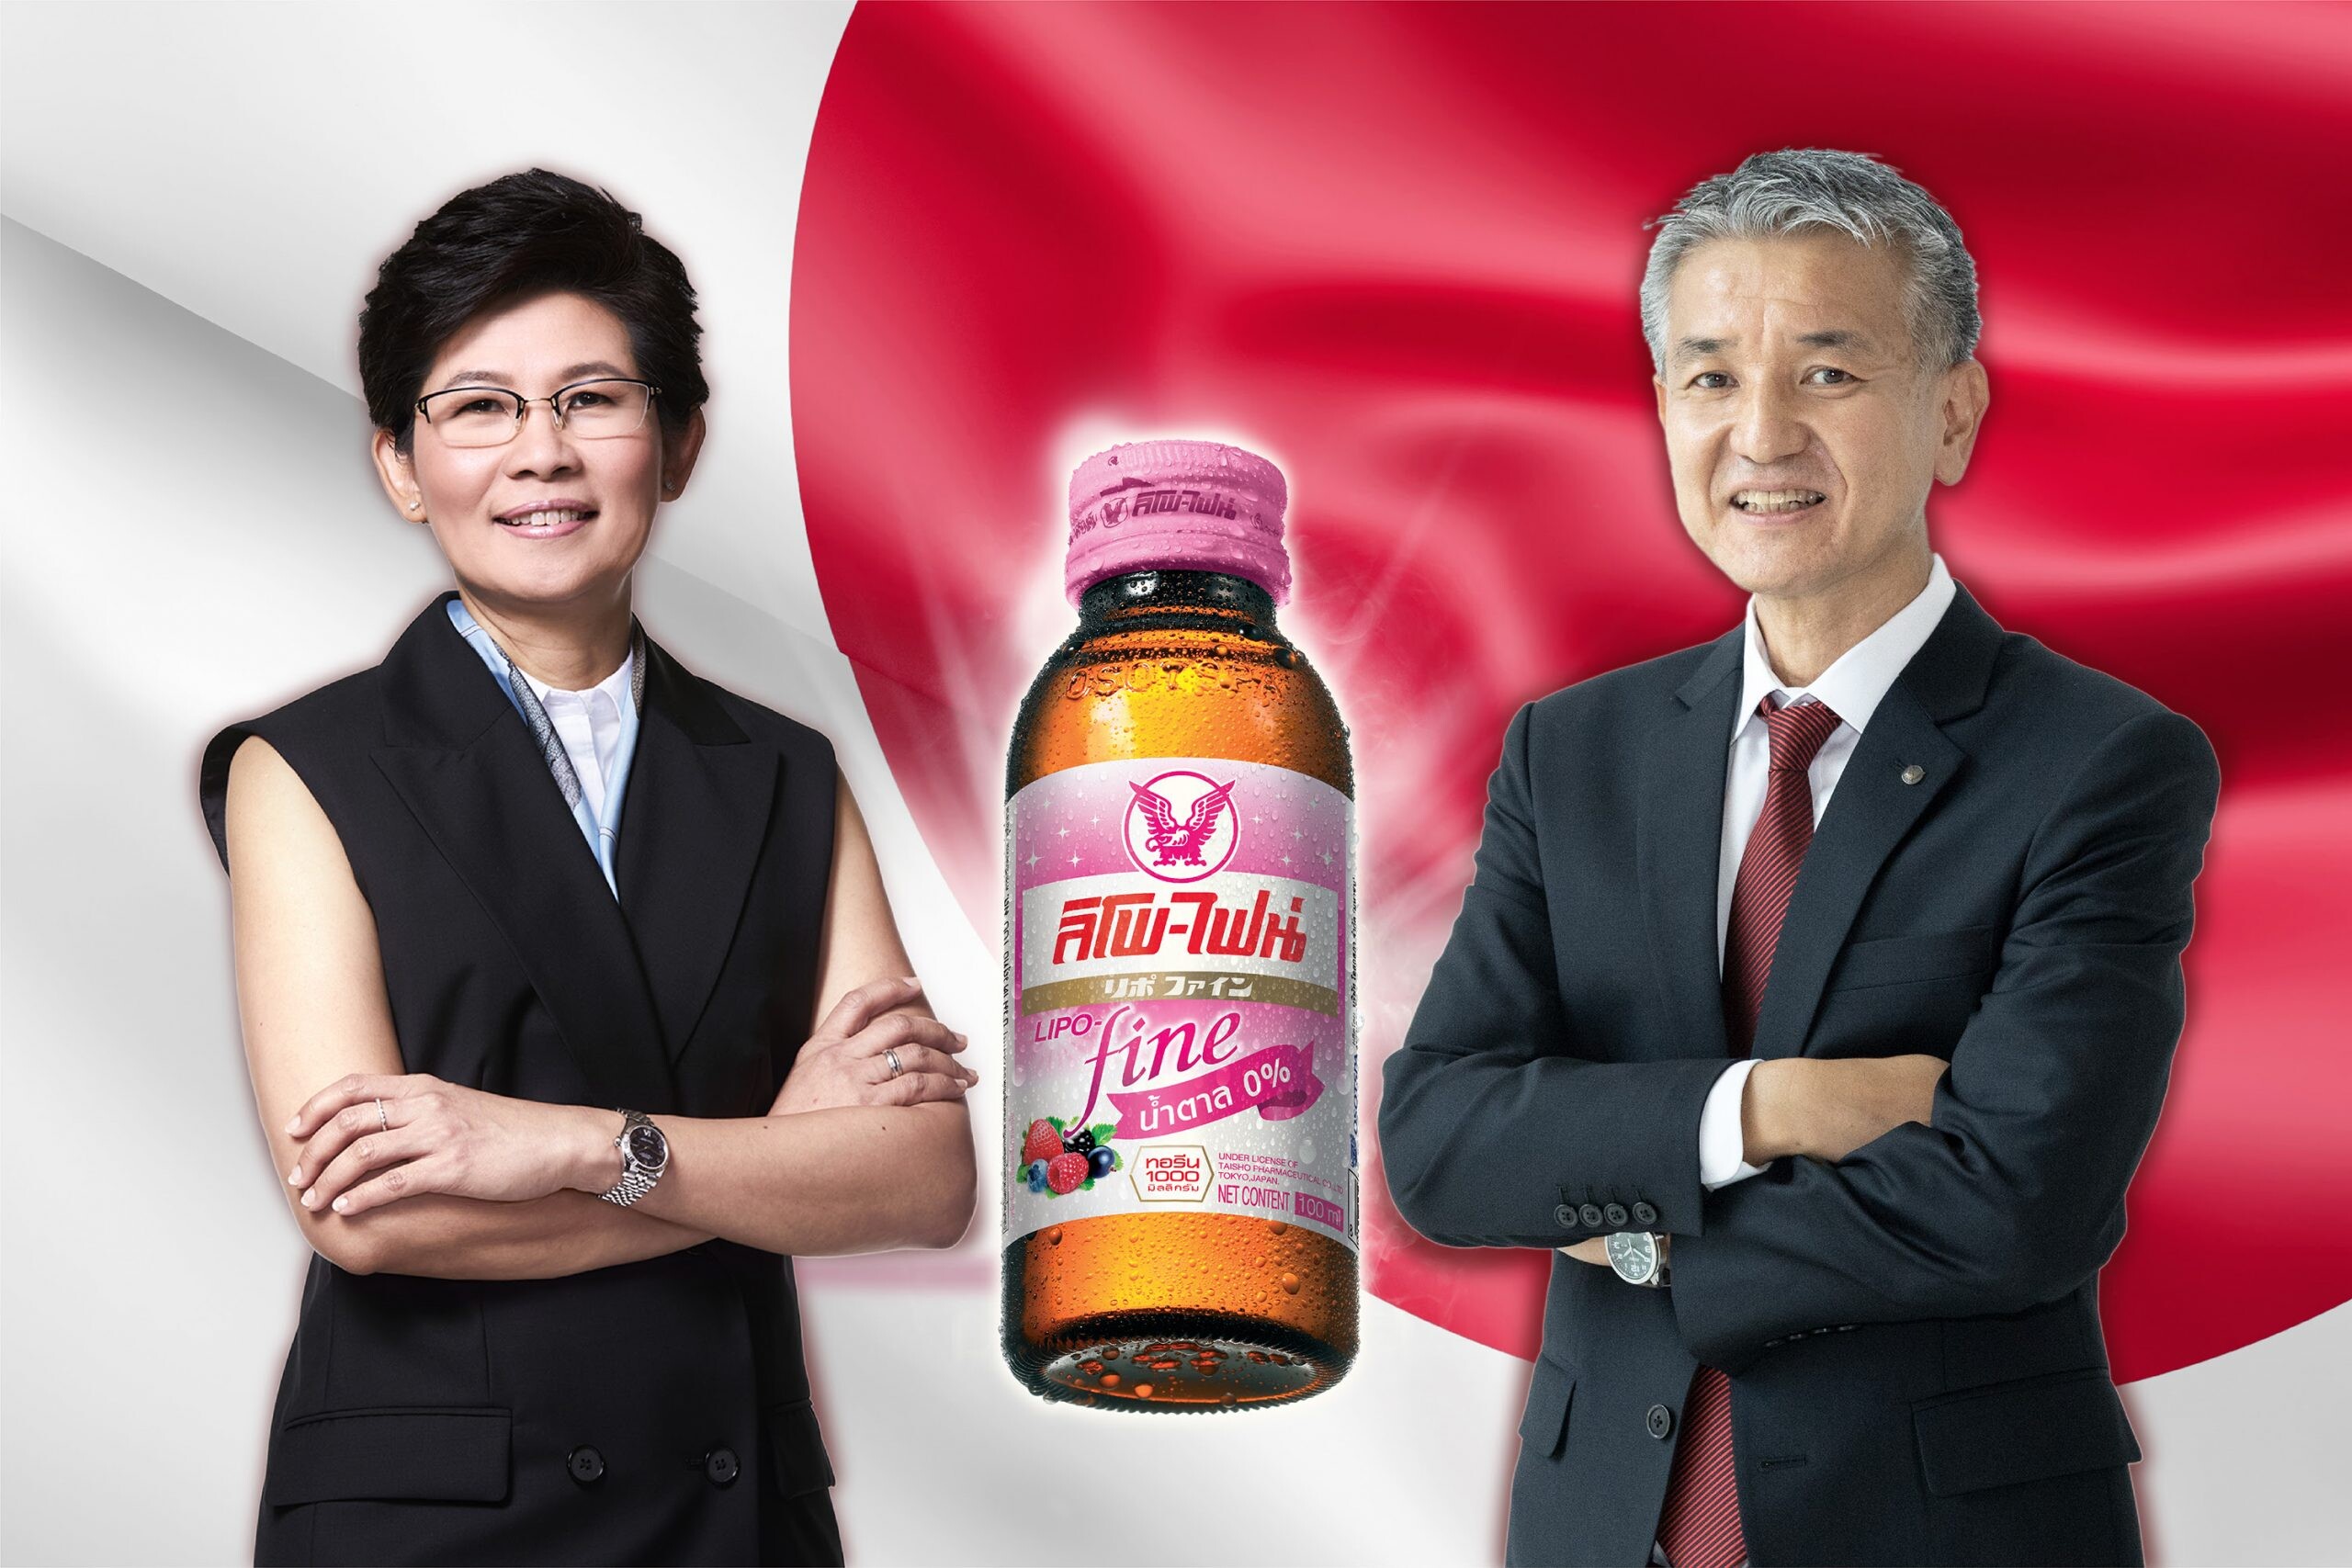 Lipo launches their first new product in 22 years, Lipo-fine, the first-ever energy drink for women!